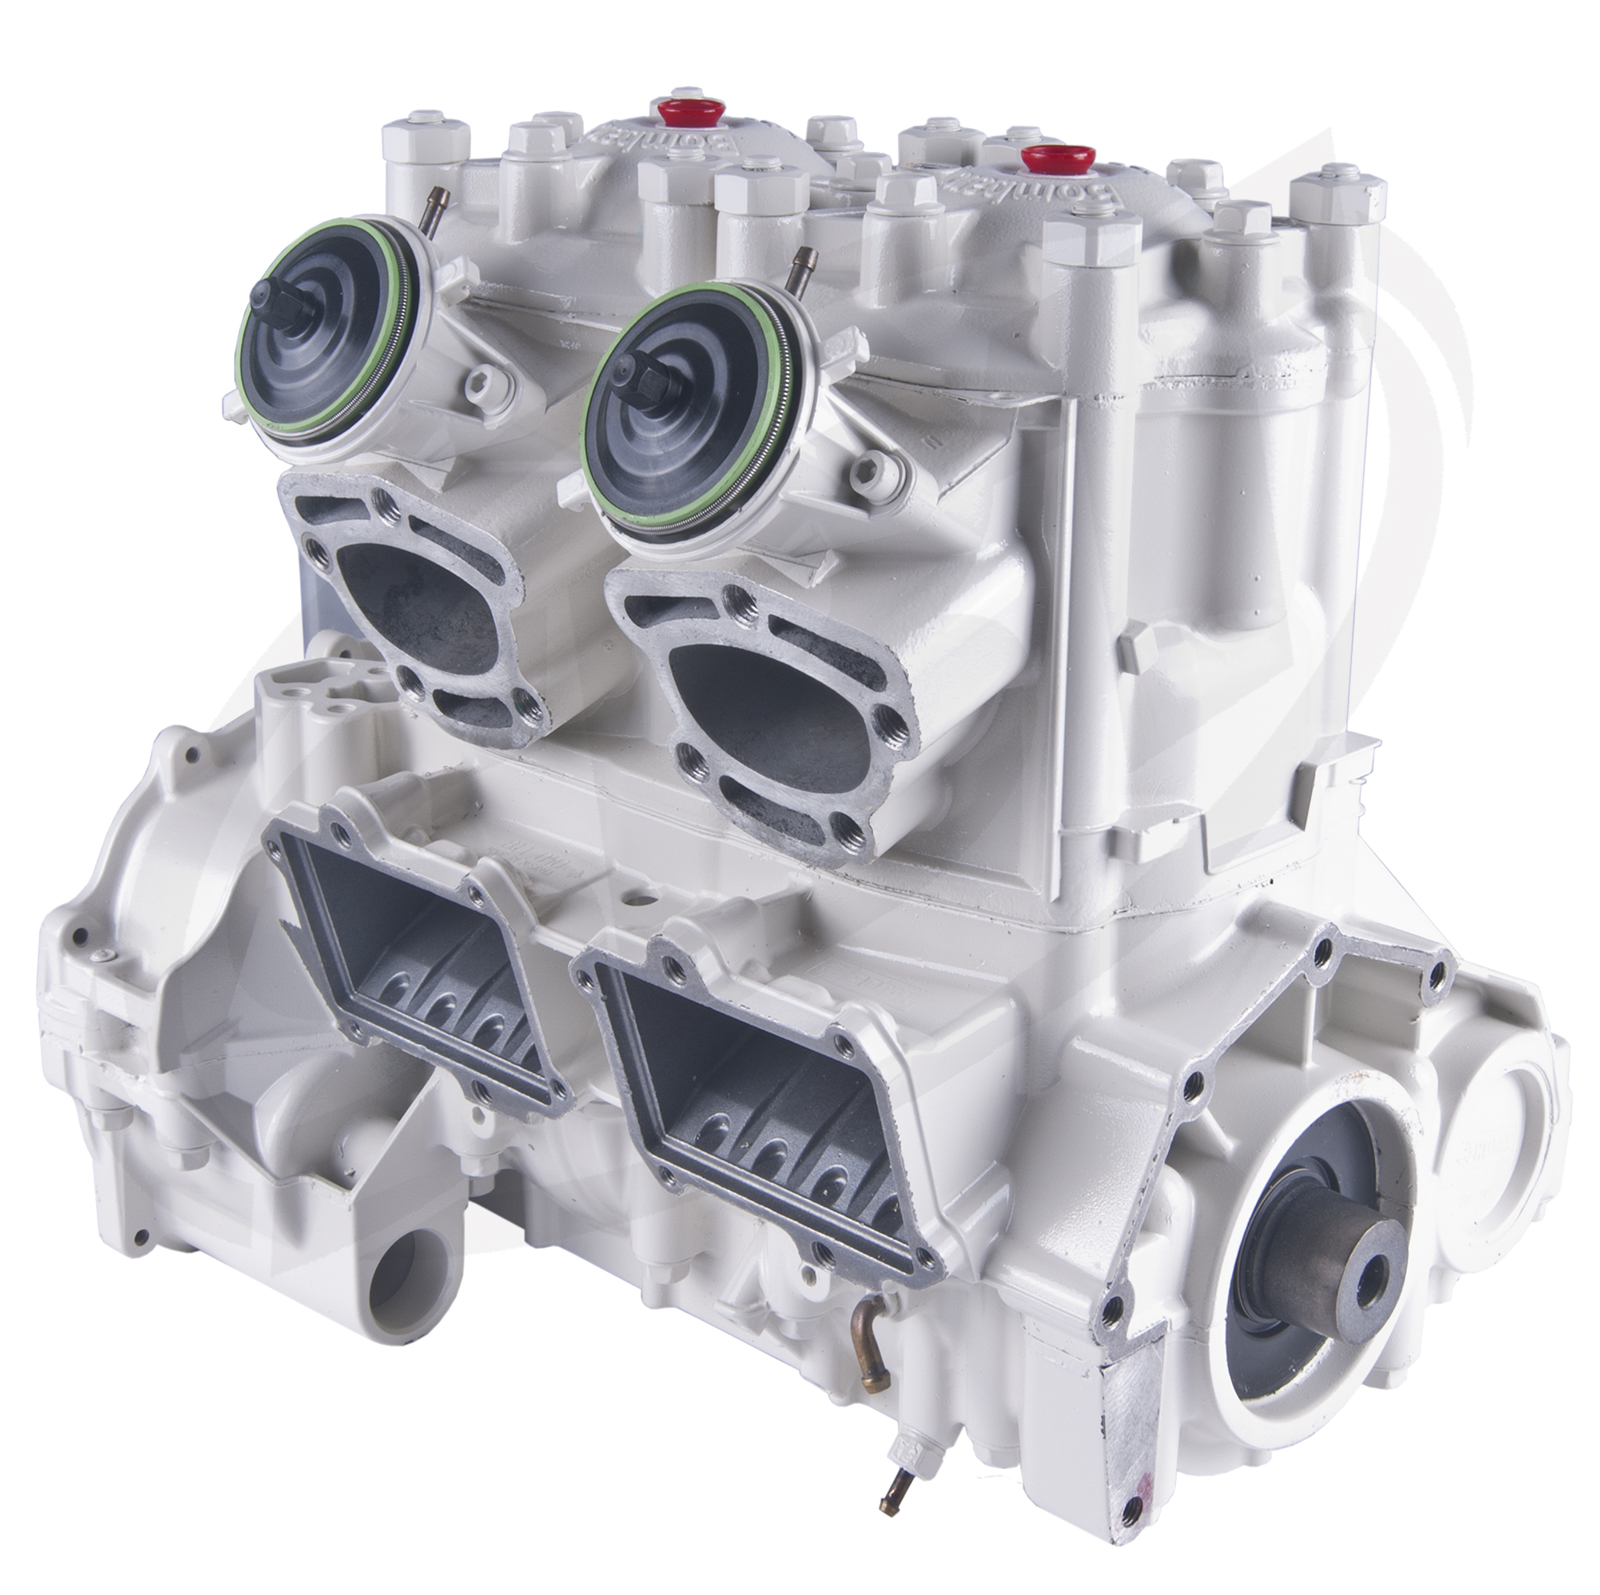 Engine for Sea-Doo 951 /947 White GSX Limited 1997.5: